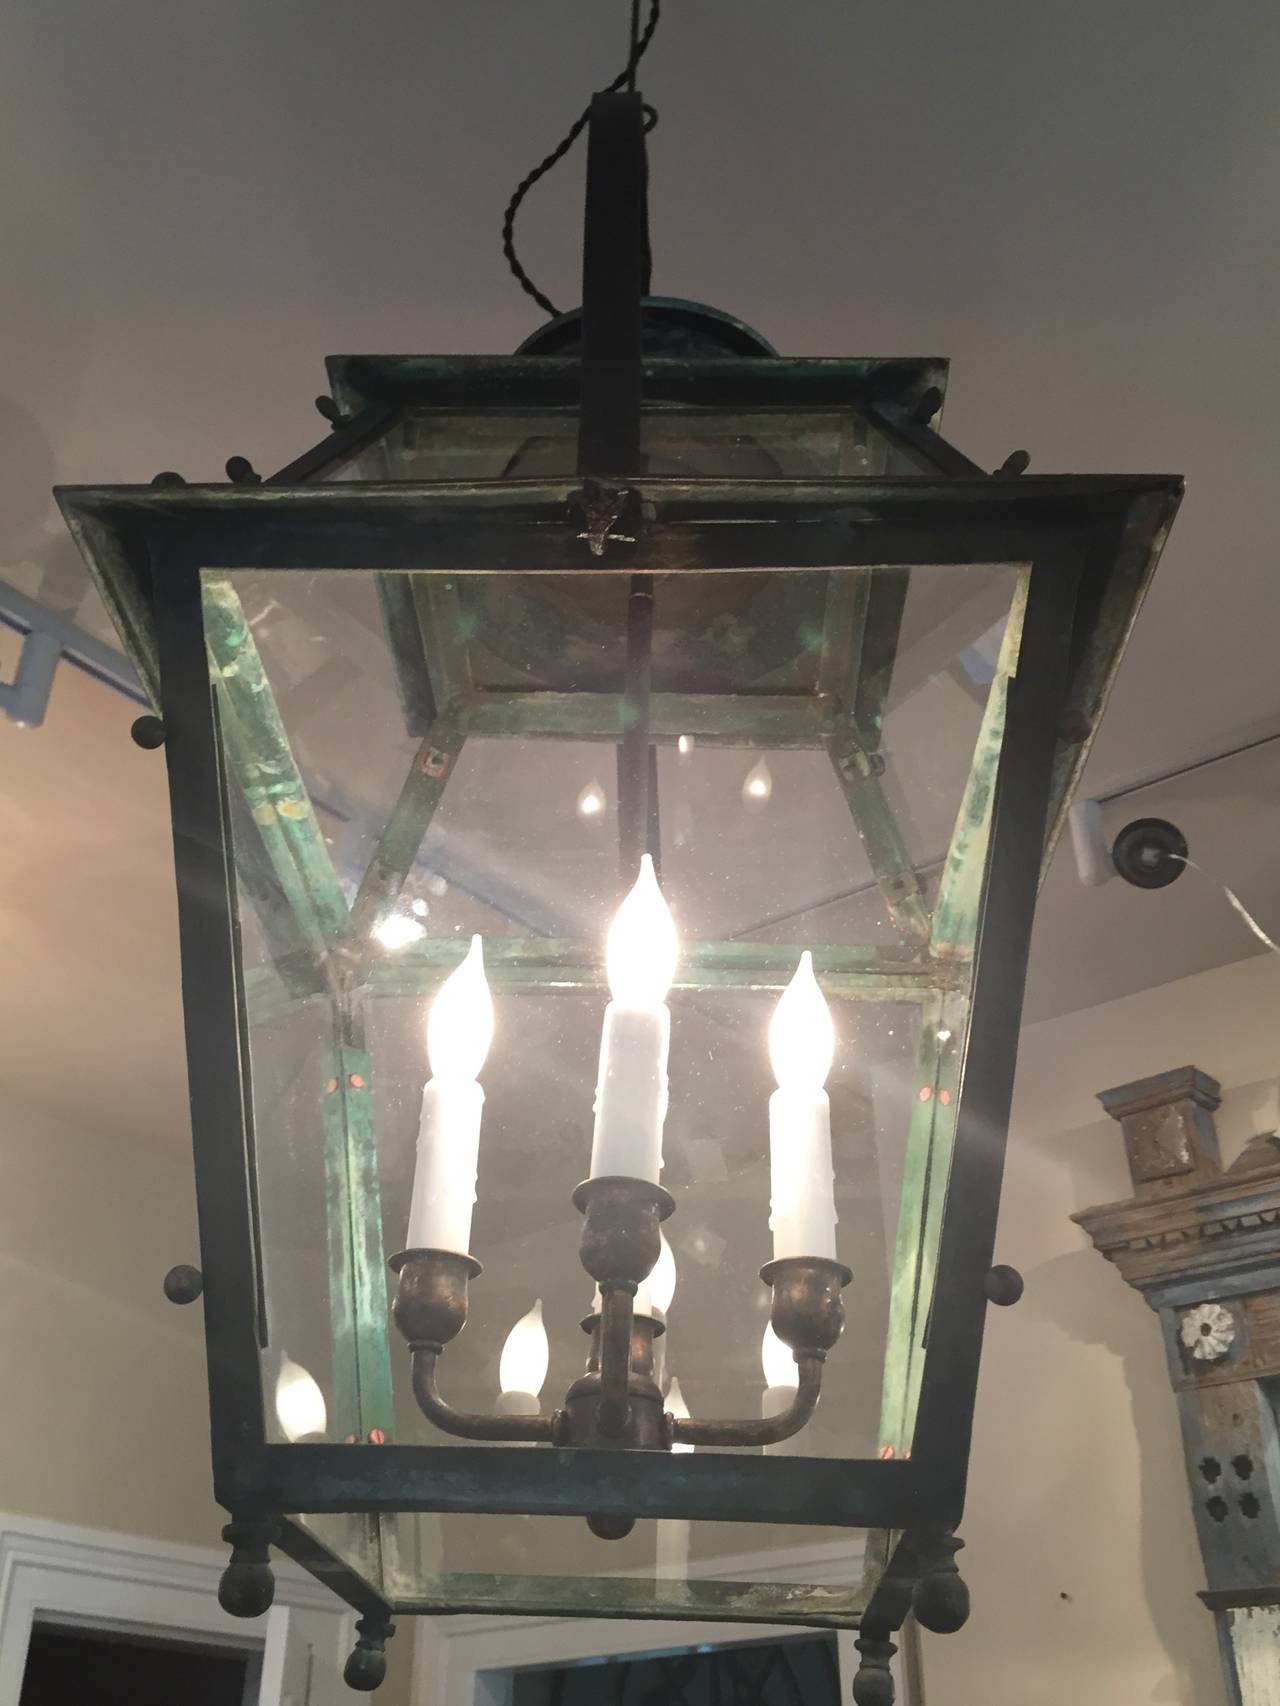 This beauty is quite early for French lanterns and dates to the mid-19th century Hand-fashioned from copper, with a prominent hand-hammered bronze handle and hook, it features a lightly verdigris surface that will only become more beautiful as the